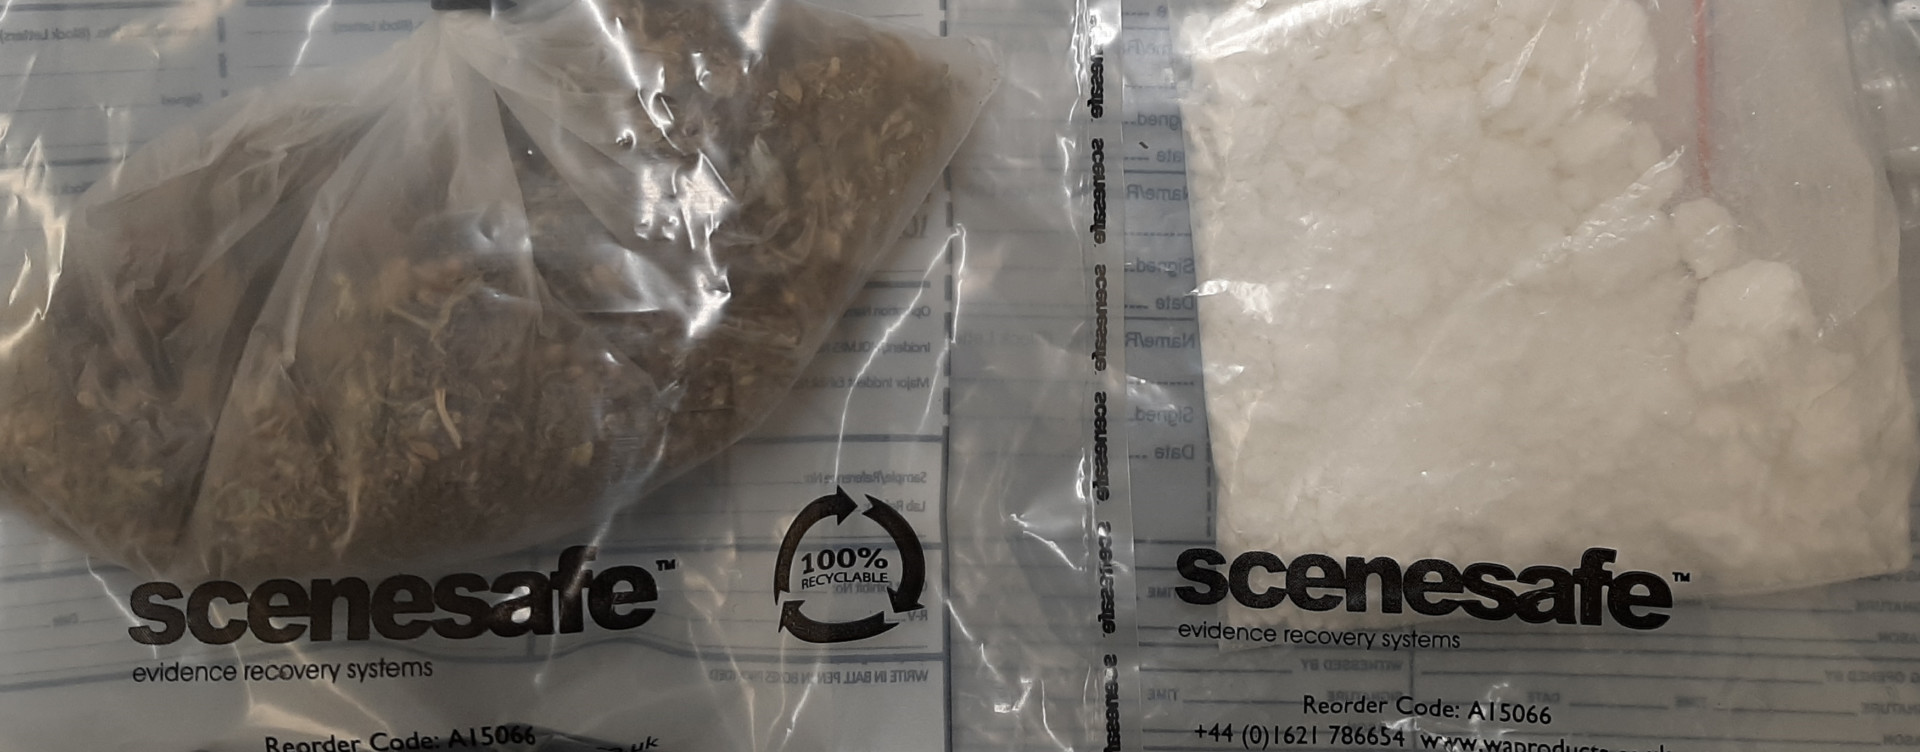 Man arrested as £3,000 worth of drugs seized in Newtownsewart search